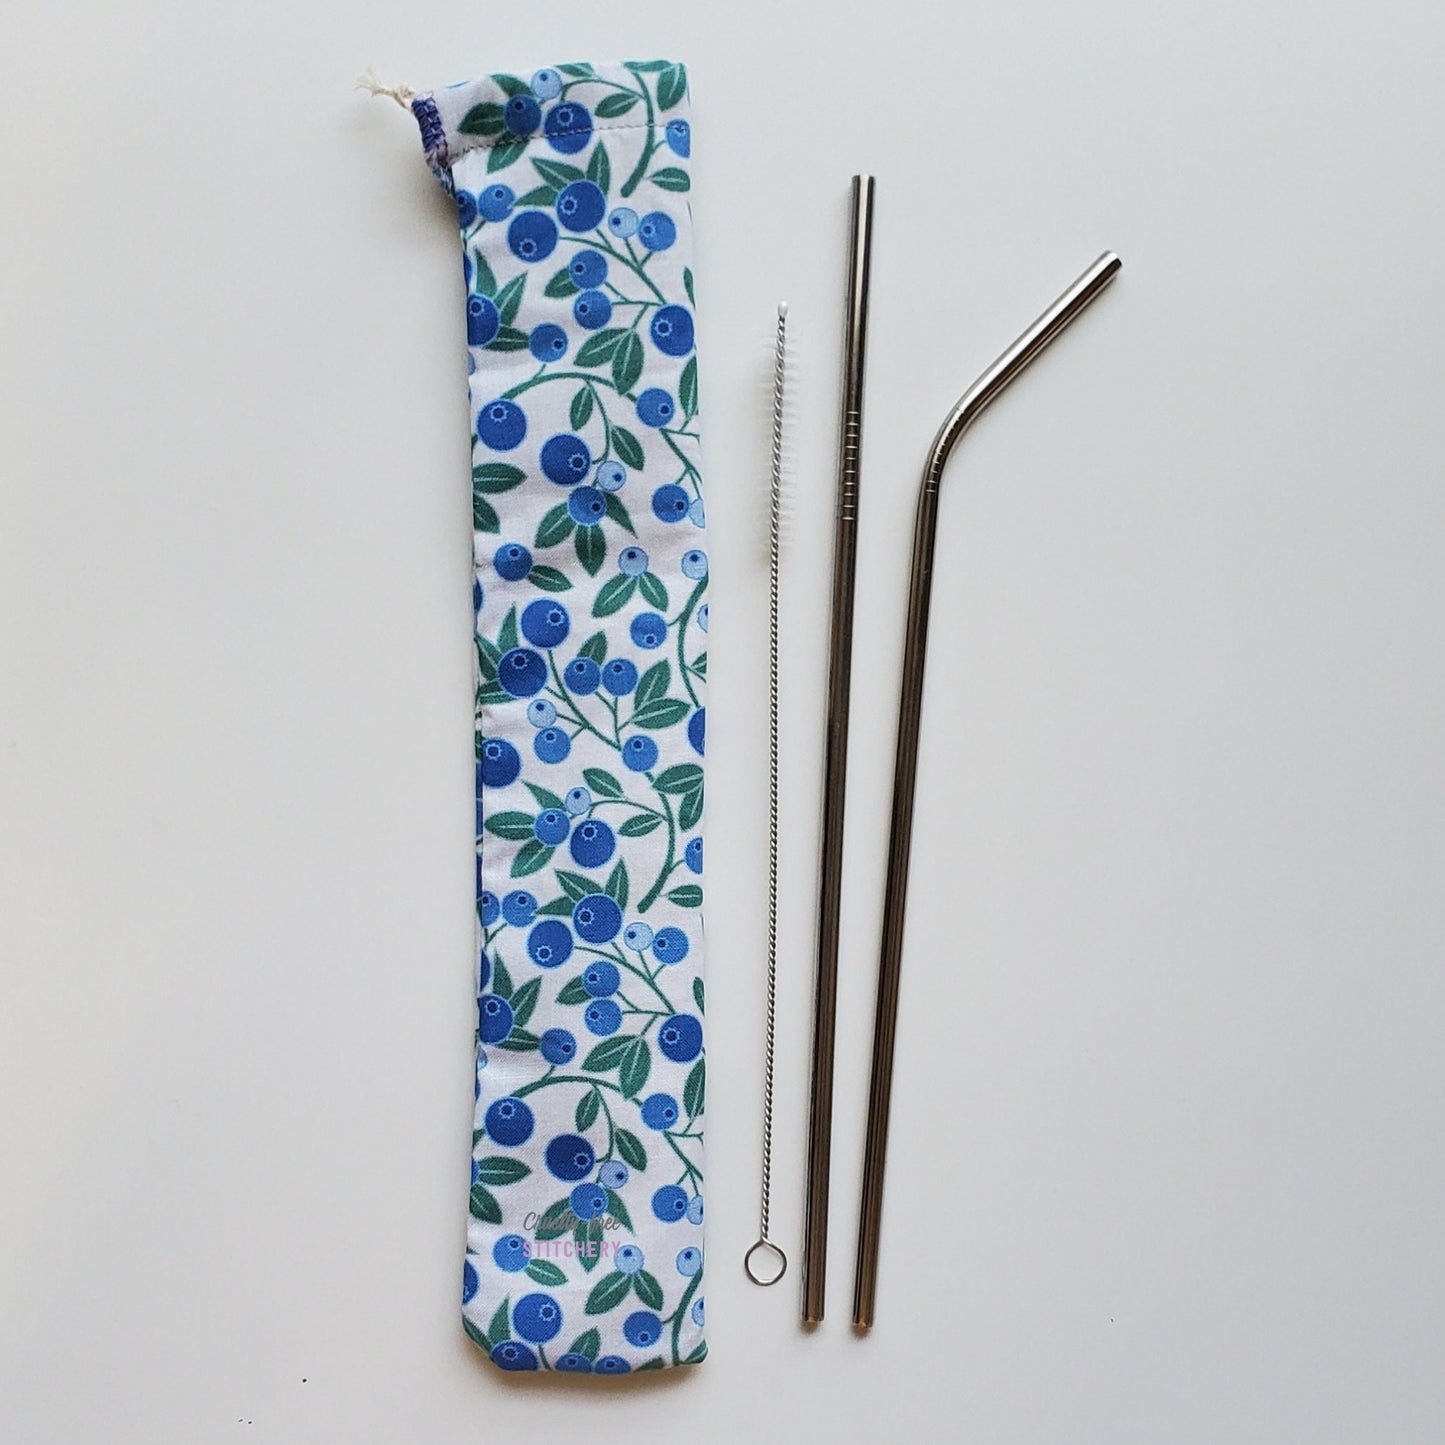 Reusable straw pouch in the same blueberry print laying vertically next to a straw cleaner brush, a straight stainless steel straw, and a bent stainless steel straw.